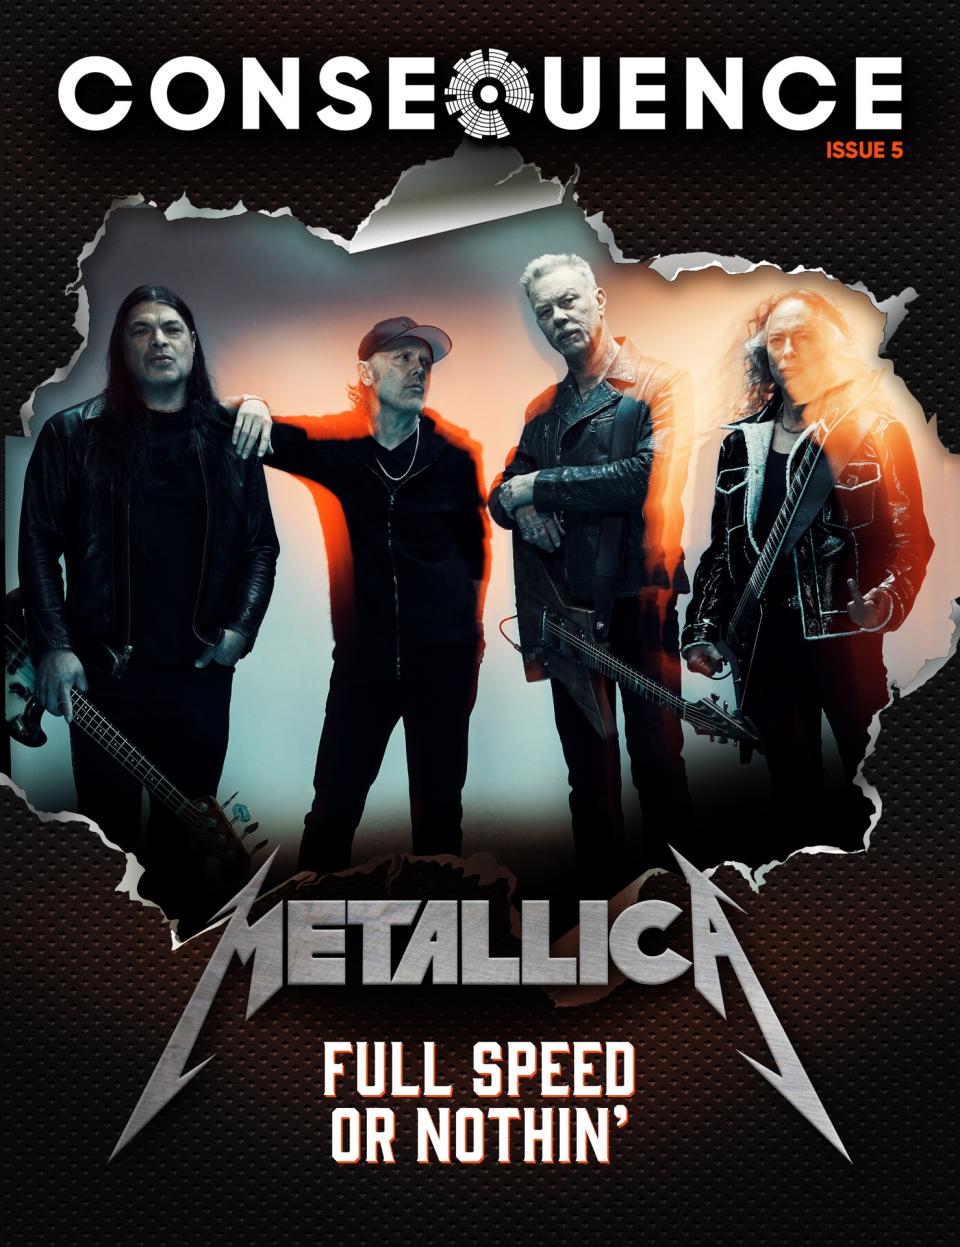 consequence metallica cover story full speed or nothin' letter from the editor resize